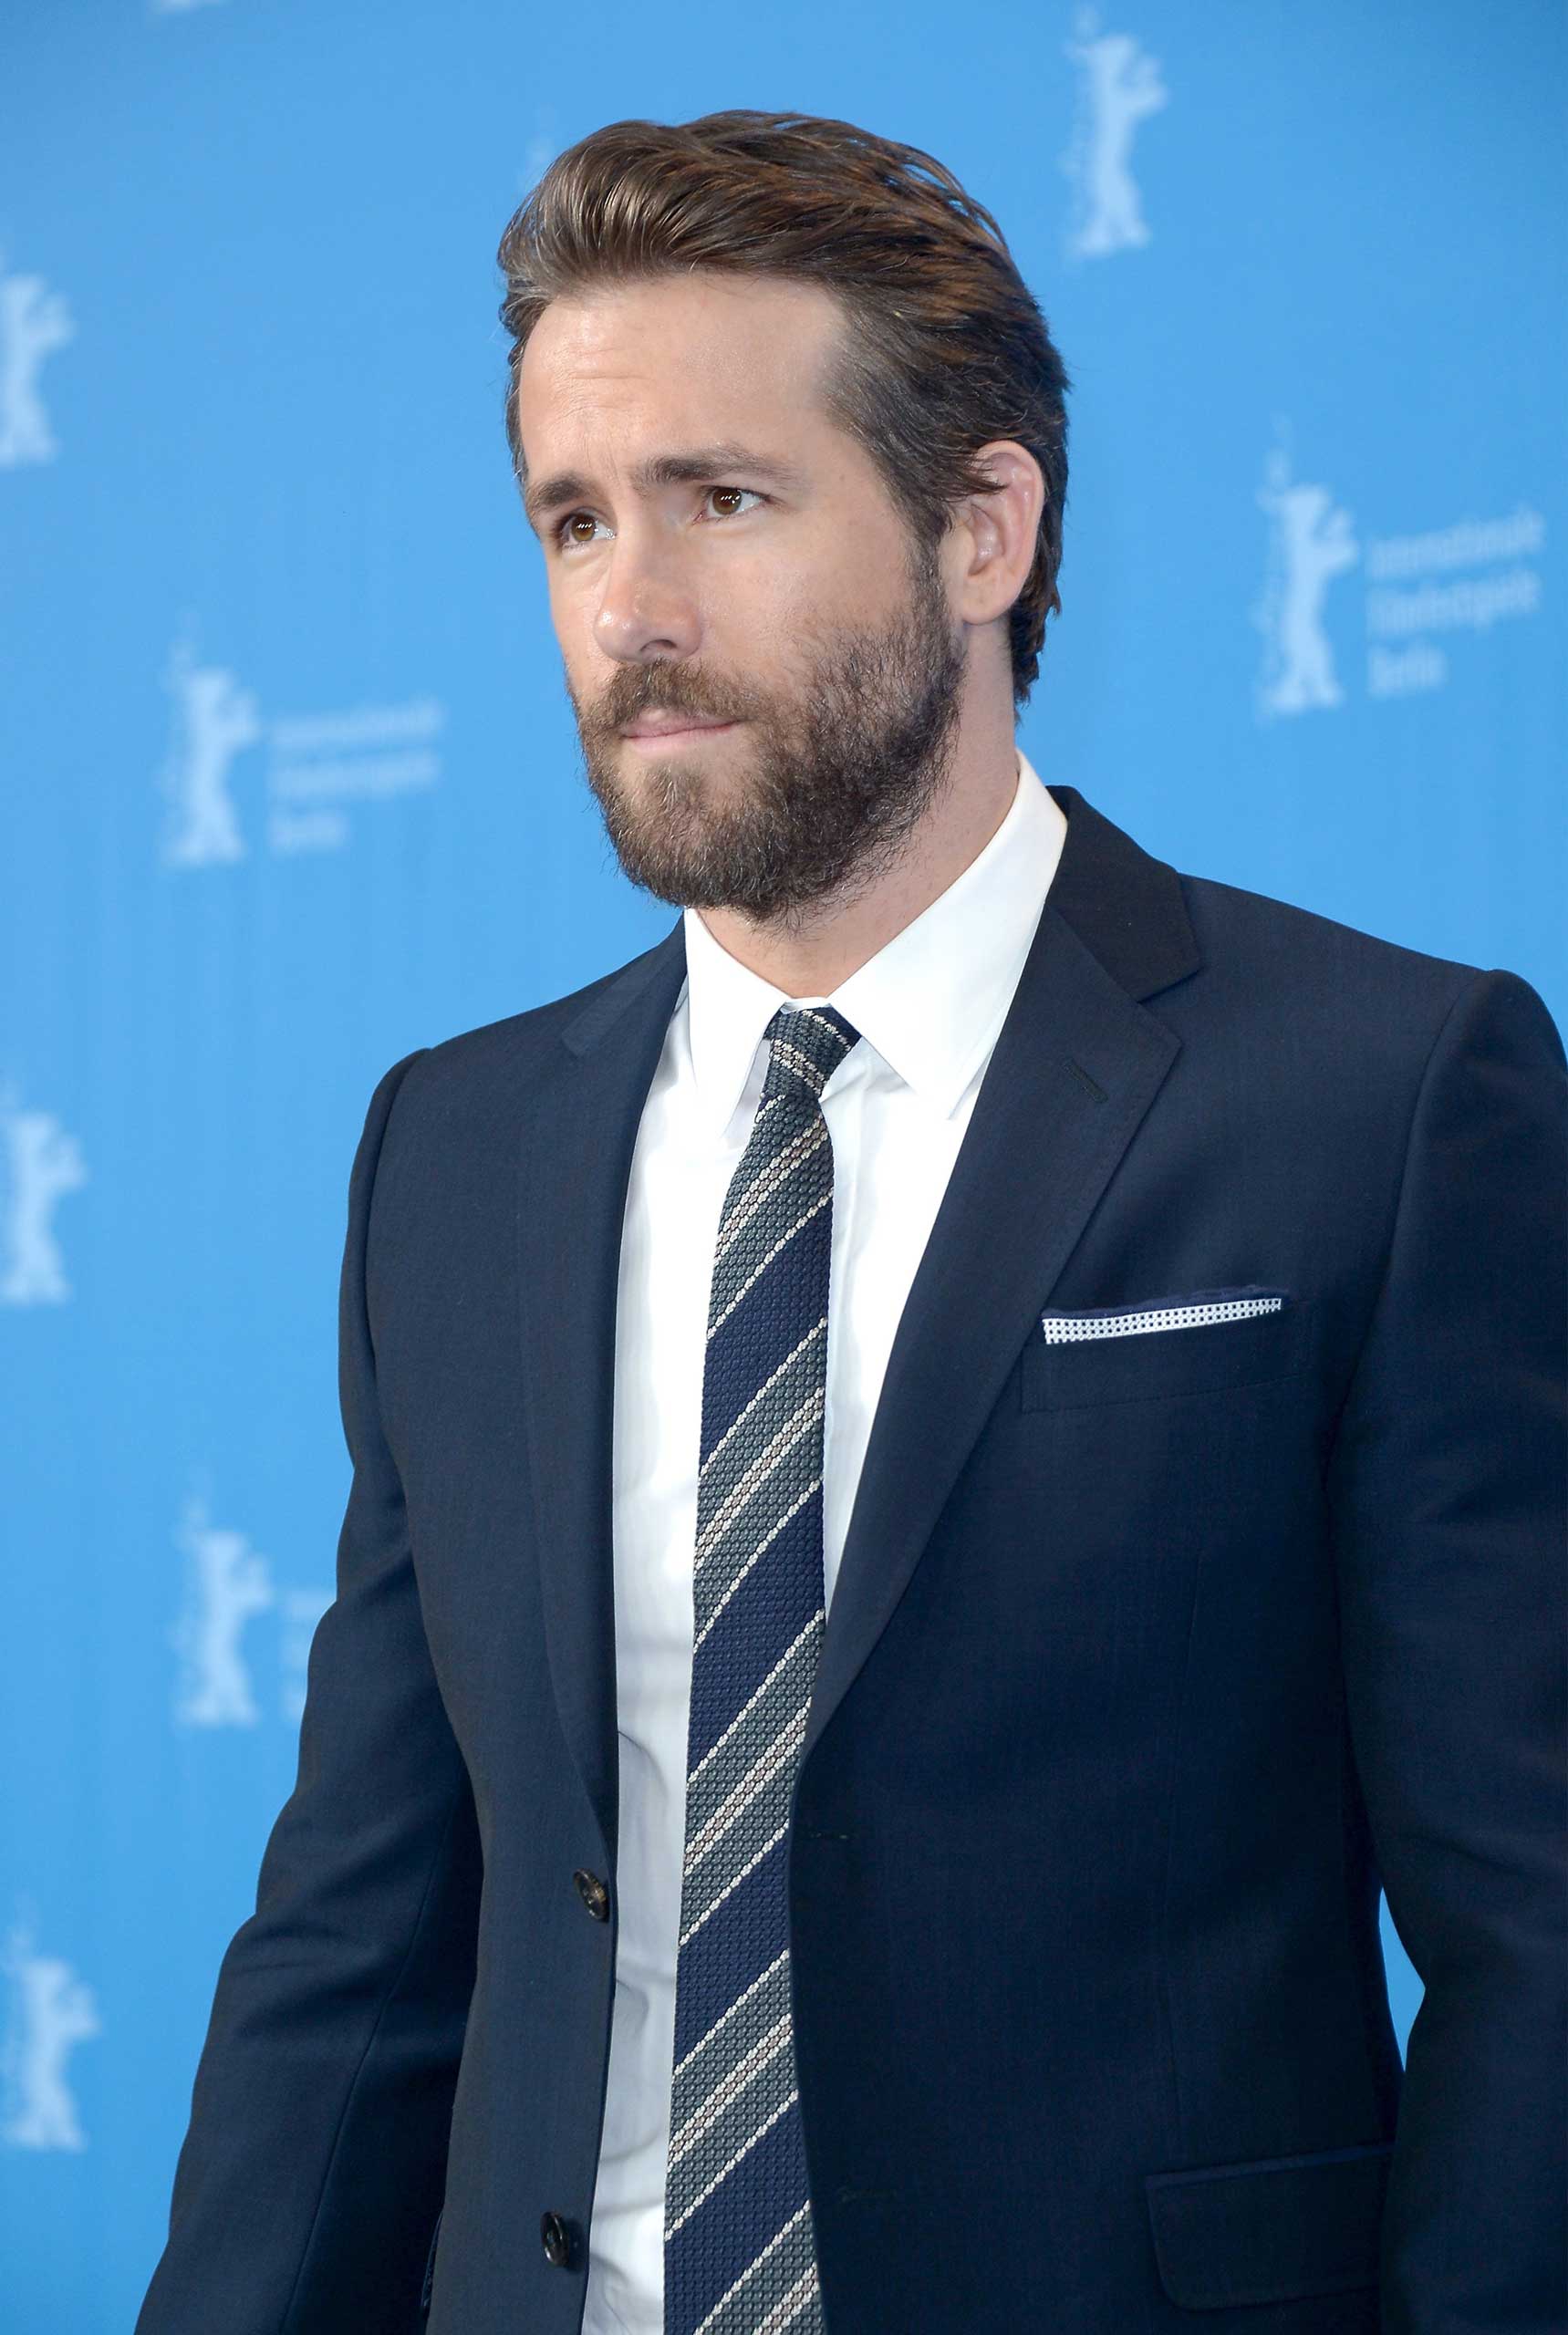 Ryan Reynolds attends the 'Woman in Gold' press conference during the 65th Berlinale International Film Festival at Grand Hyatt Hotel in Berlin on Feb. 9, 2015.